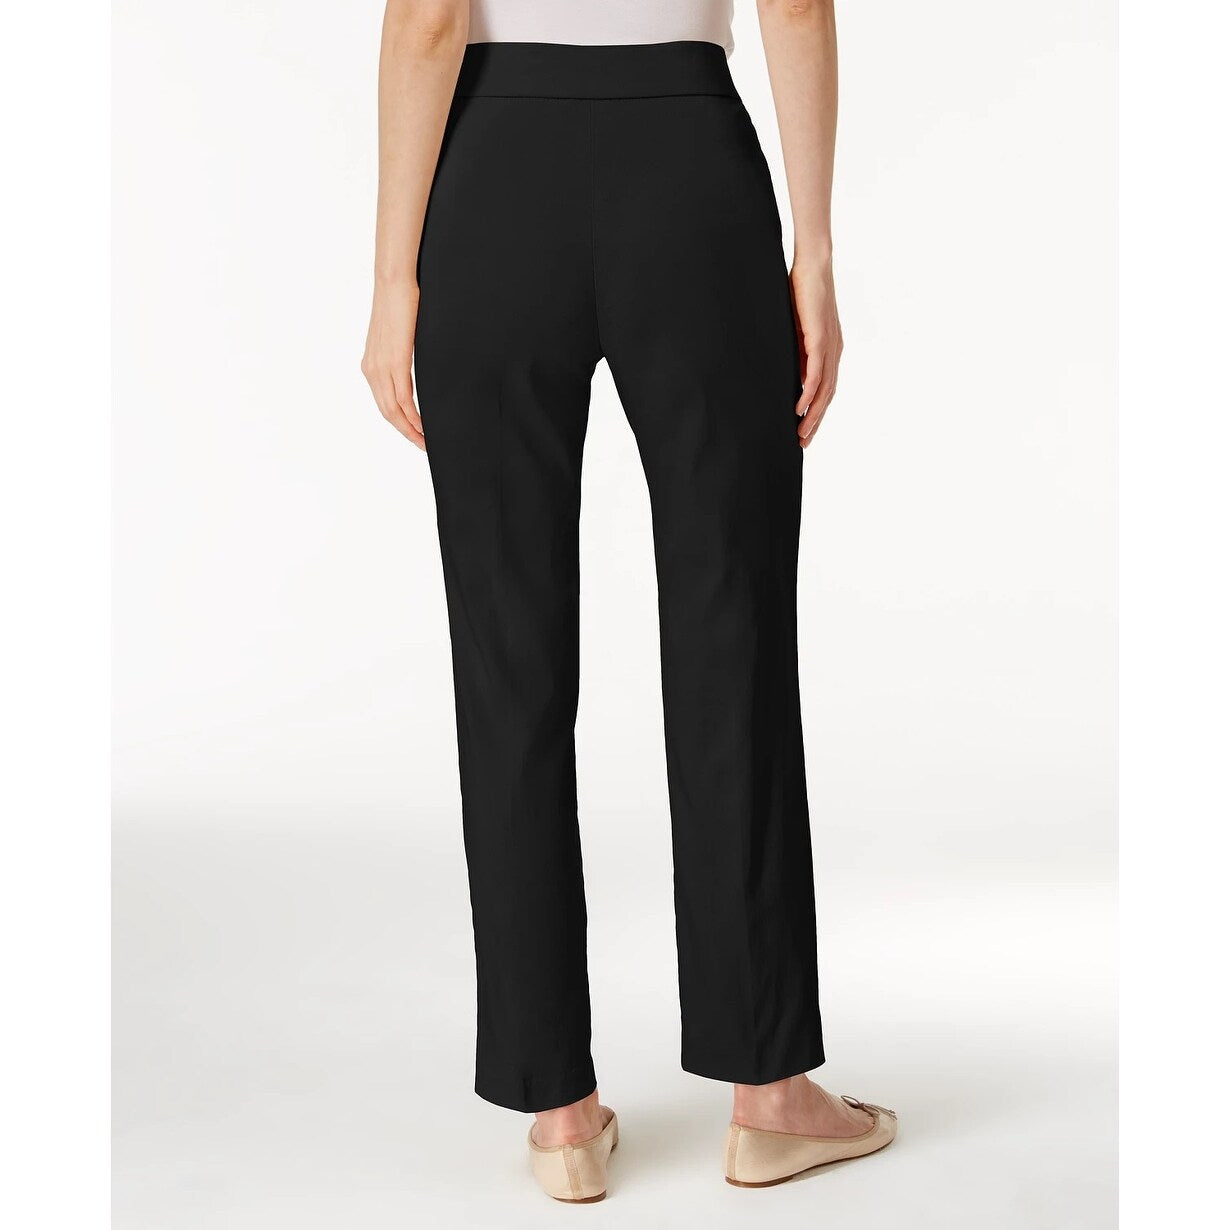 Alfred Dunner Women's Classics Allure Pull-On Pants Black Size 14 ...